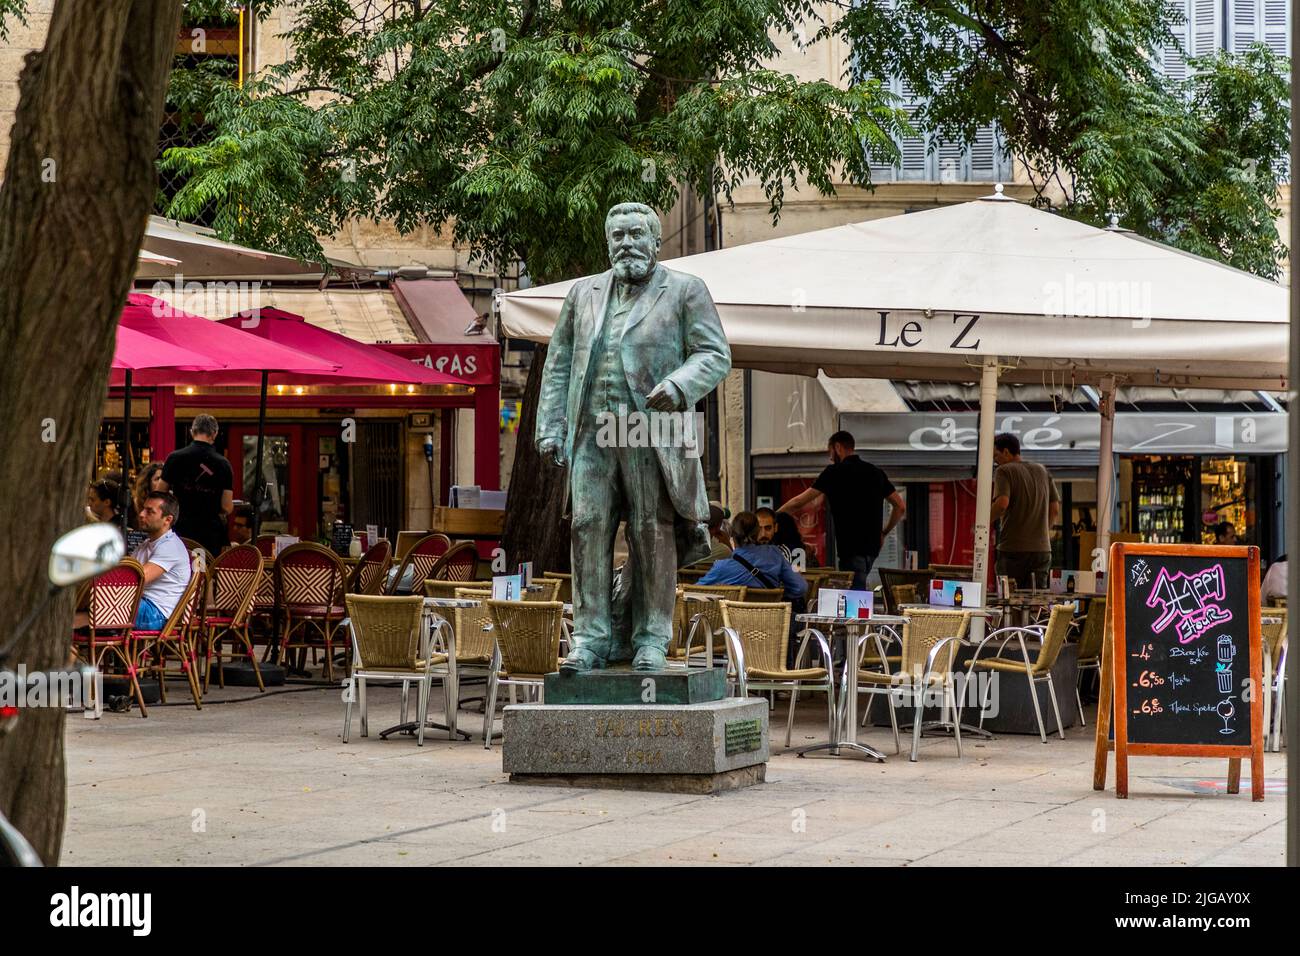 Statue of Jean Jaurès in Montpellier, France Stock Photo